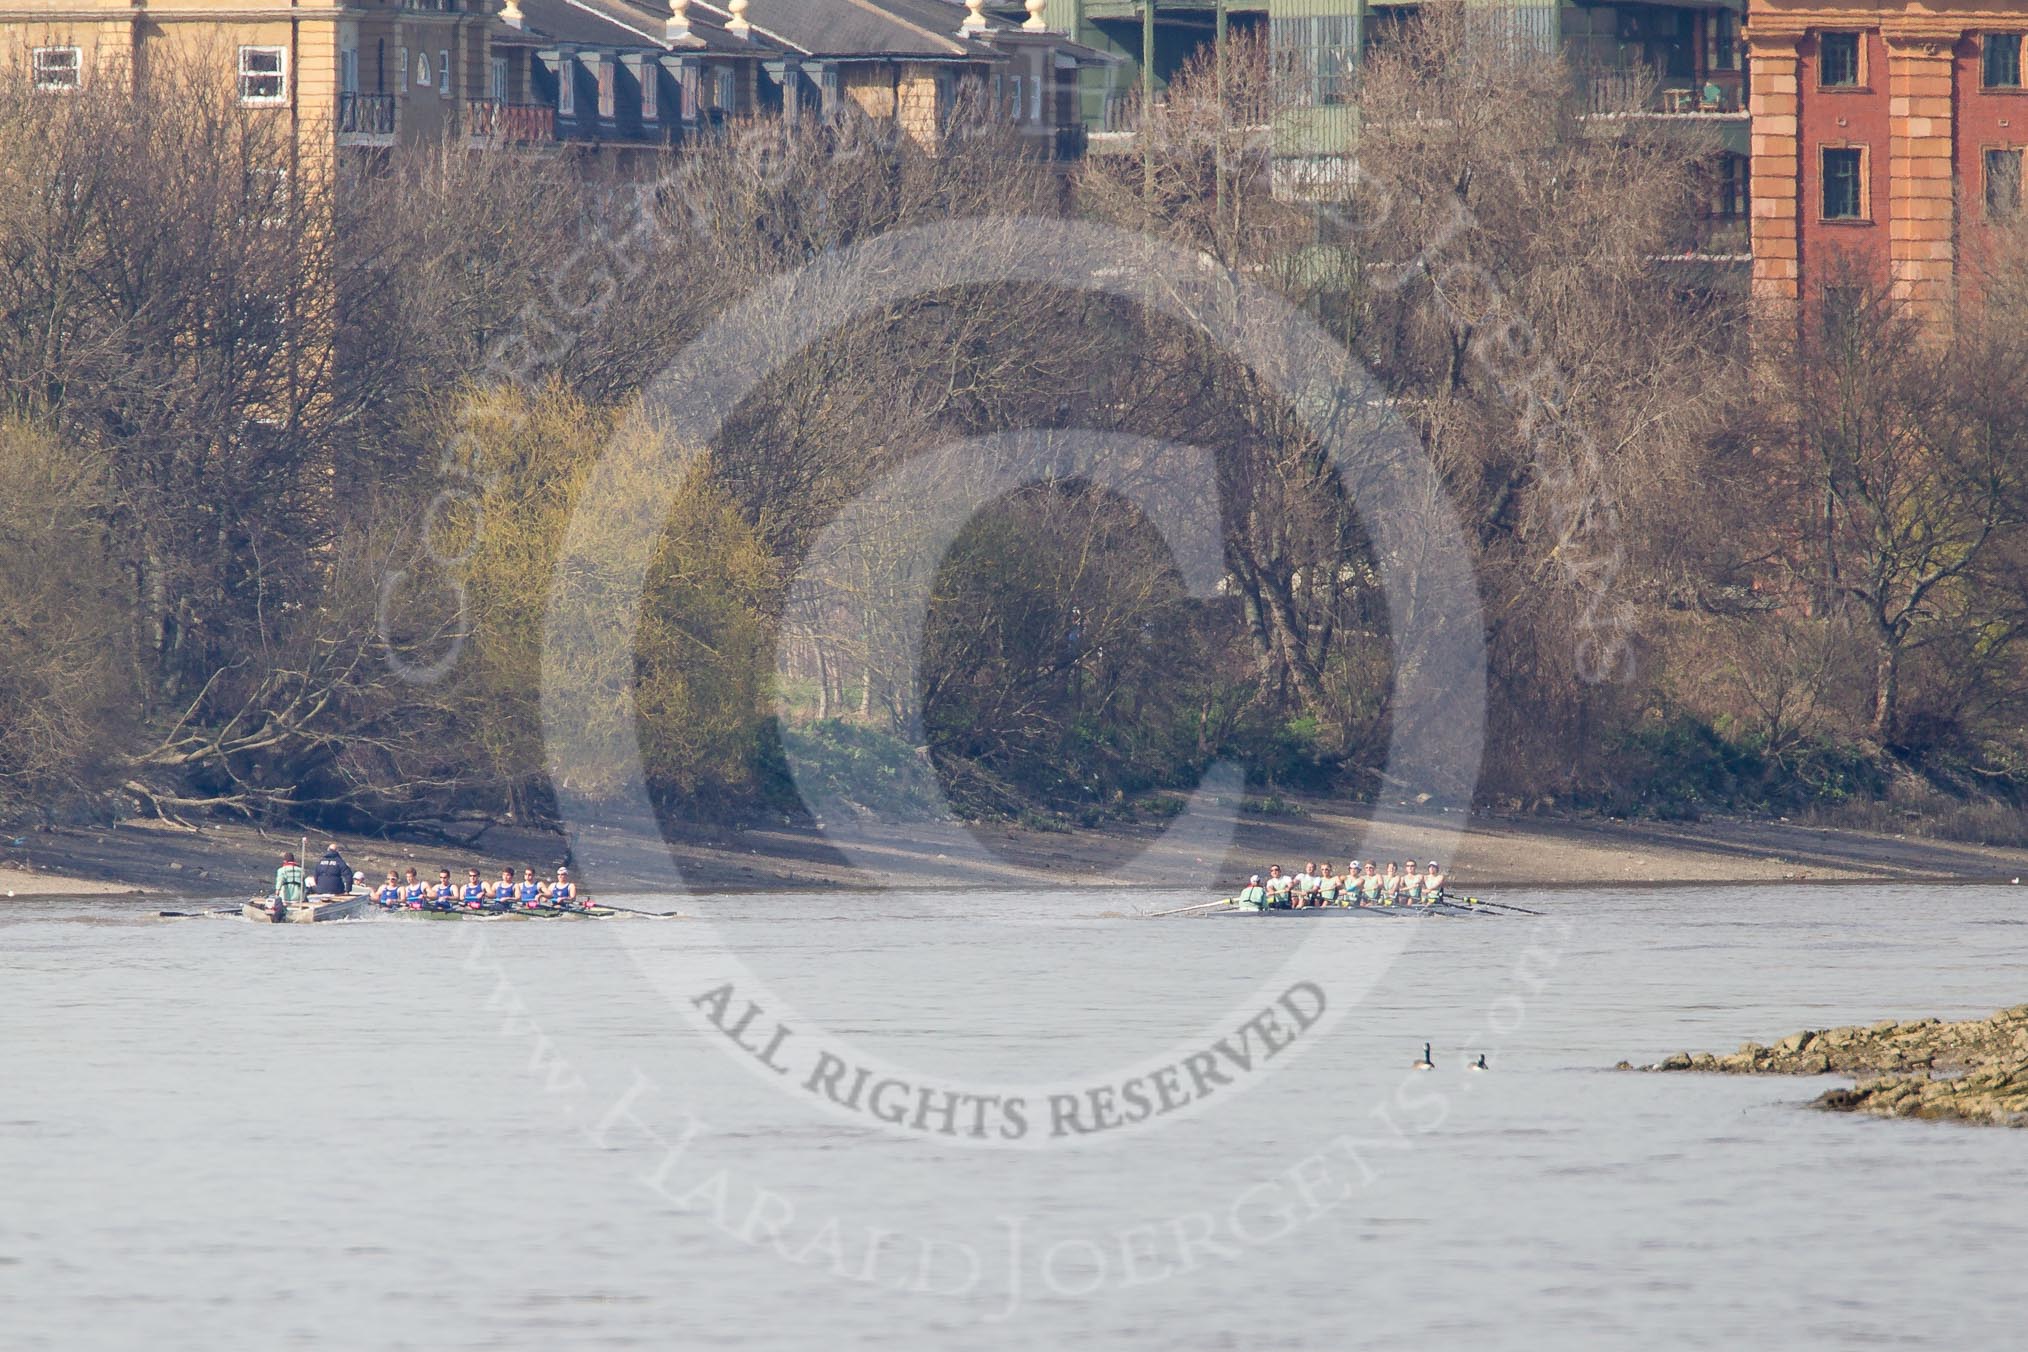 The Boat Race season 2012 - fixture CUBC vs Molesey BC: CUBC Goldie v Imperial fixture: Goldie leading towards Harrods Repository, behind the Imperial boat umpire Simon Harris..




on 25 March 2012 at 14:50, image #74